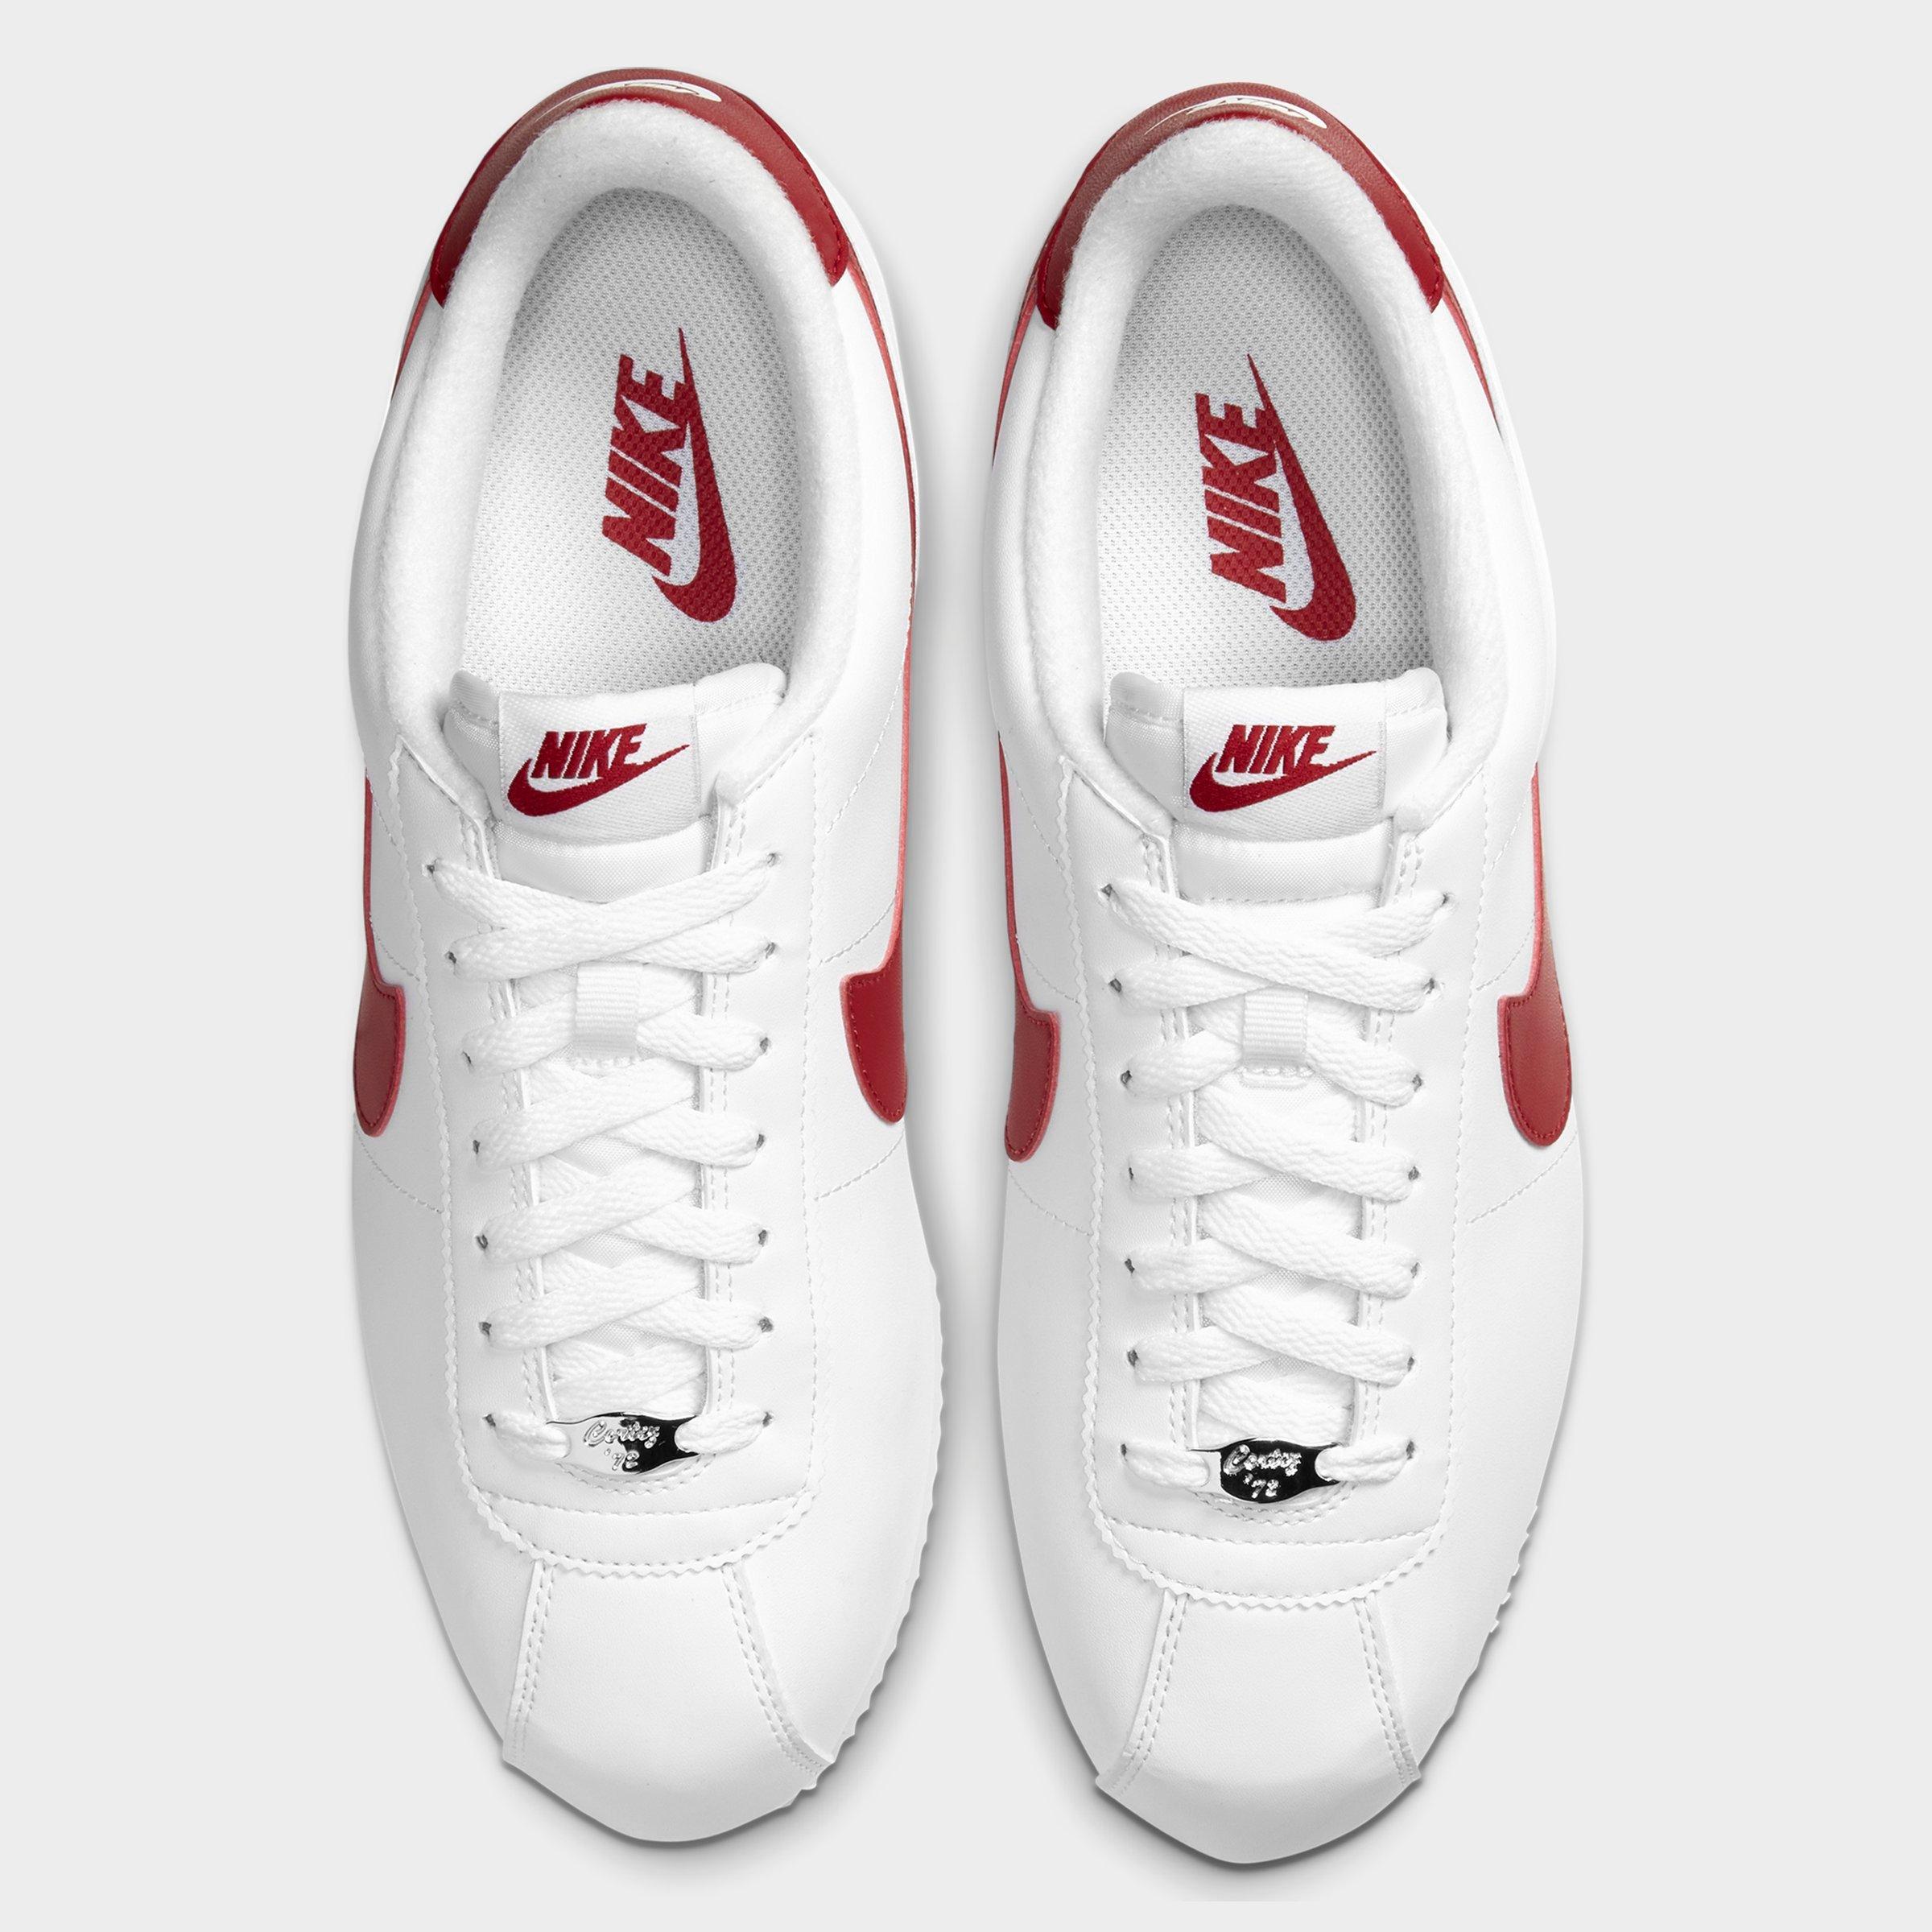 nike cortez mens red and white